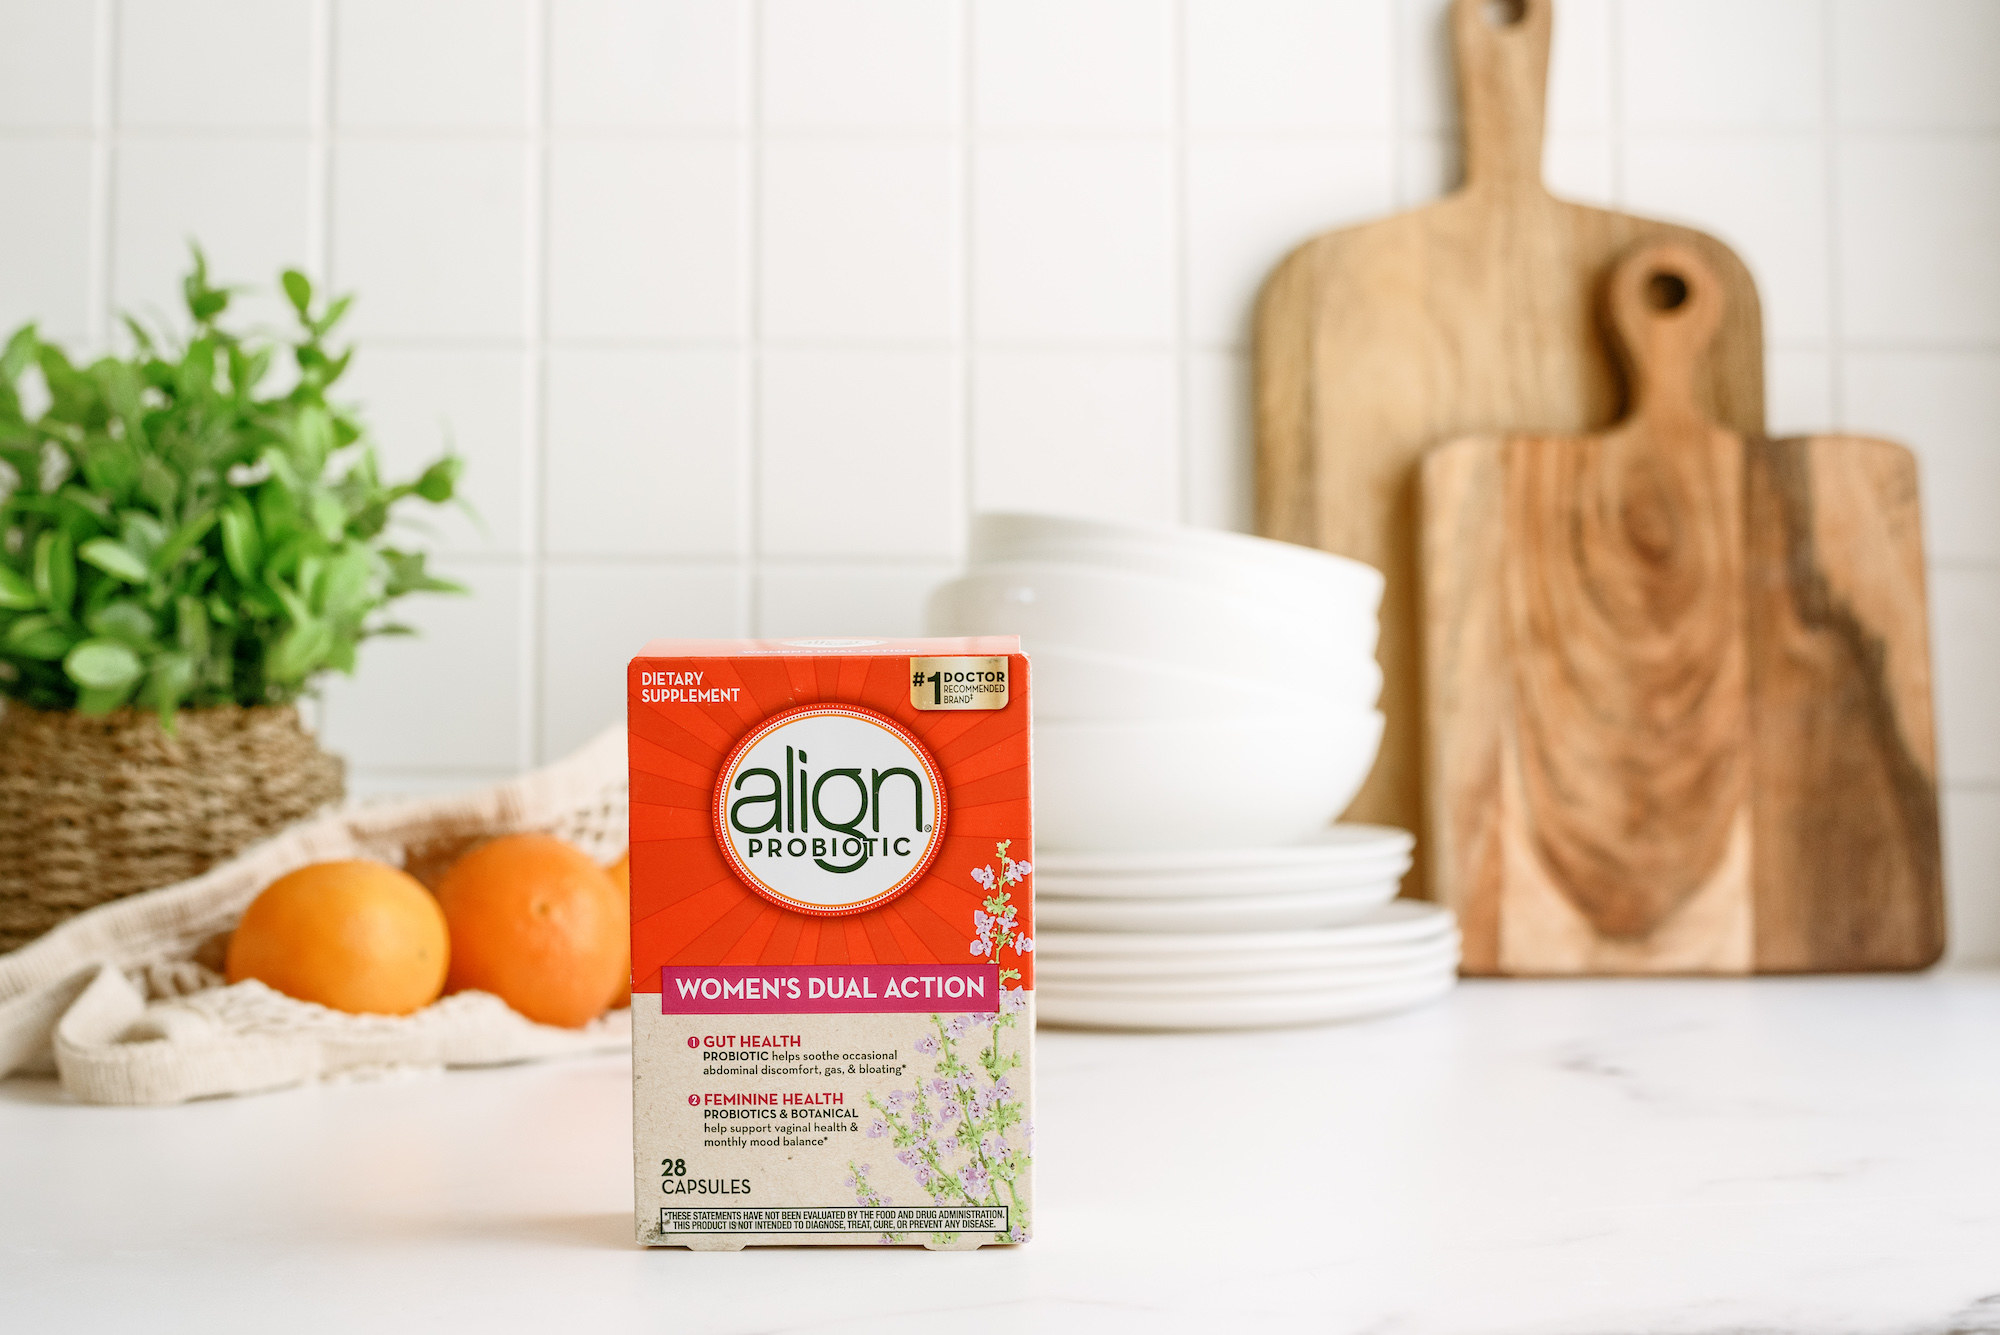 Box of Align Probiotic sitting on kitchen counter